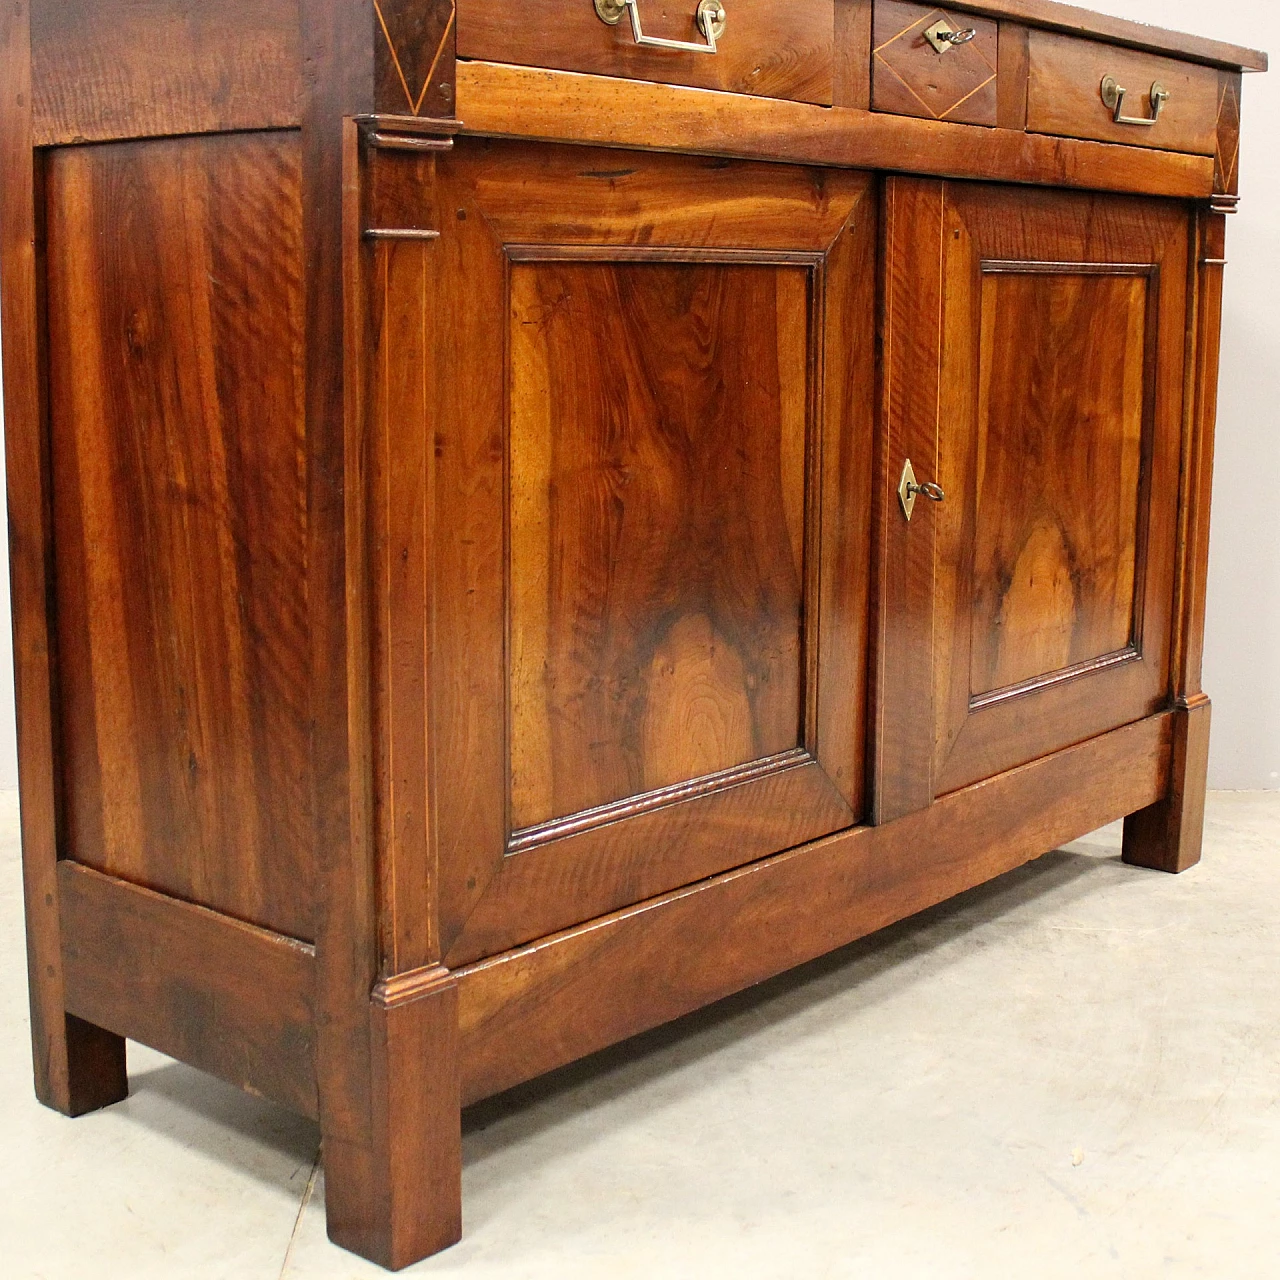 Empire solid walnut sideboard with thread inlays, early 19th century 7